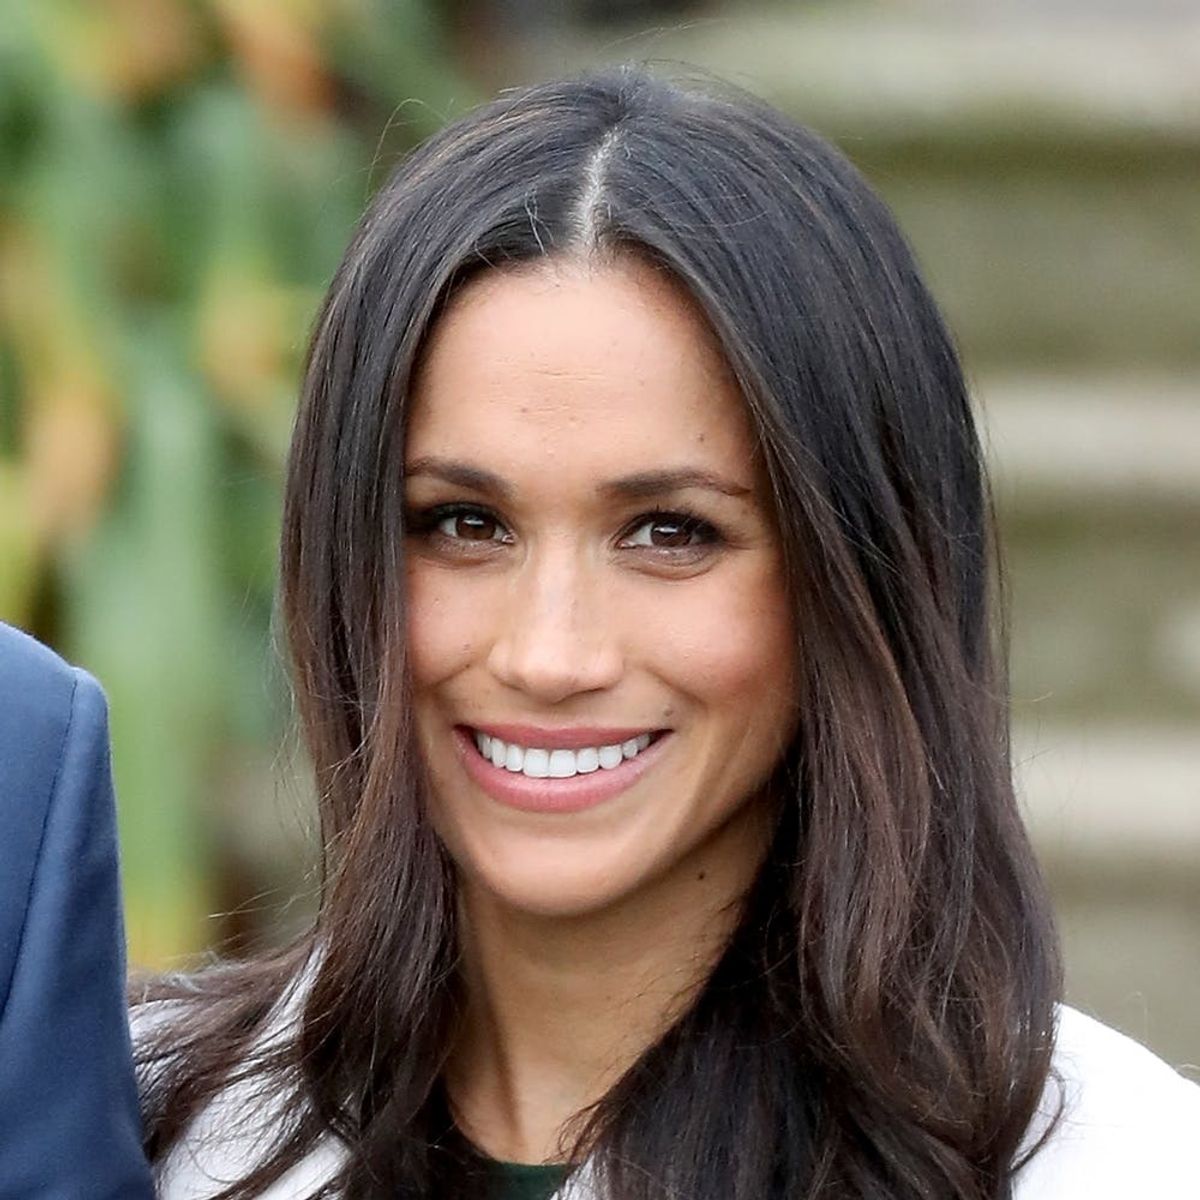 Meghan Markle’s Engagement Ring Is Worth *This* Much, According to Experts